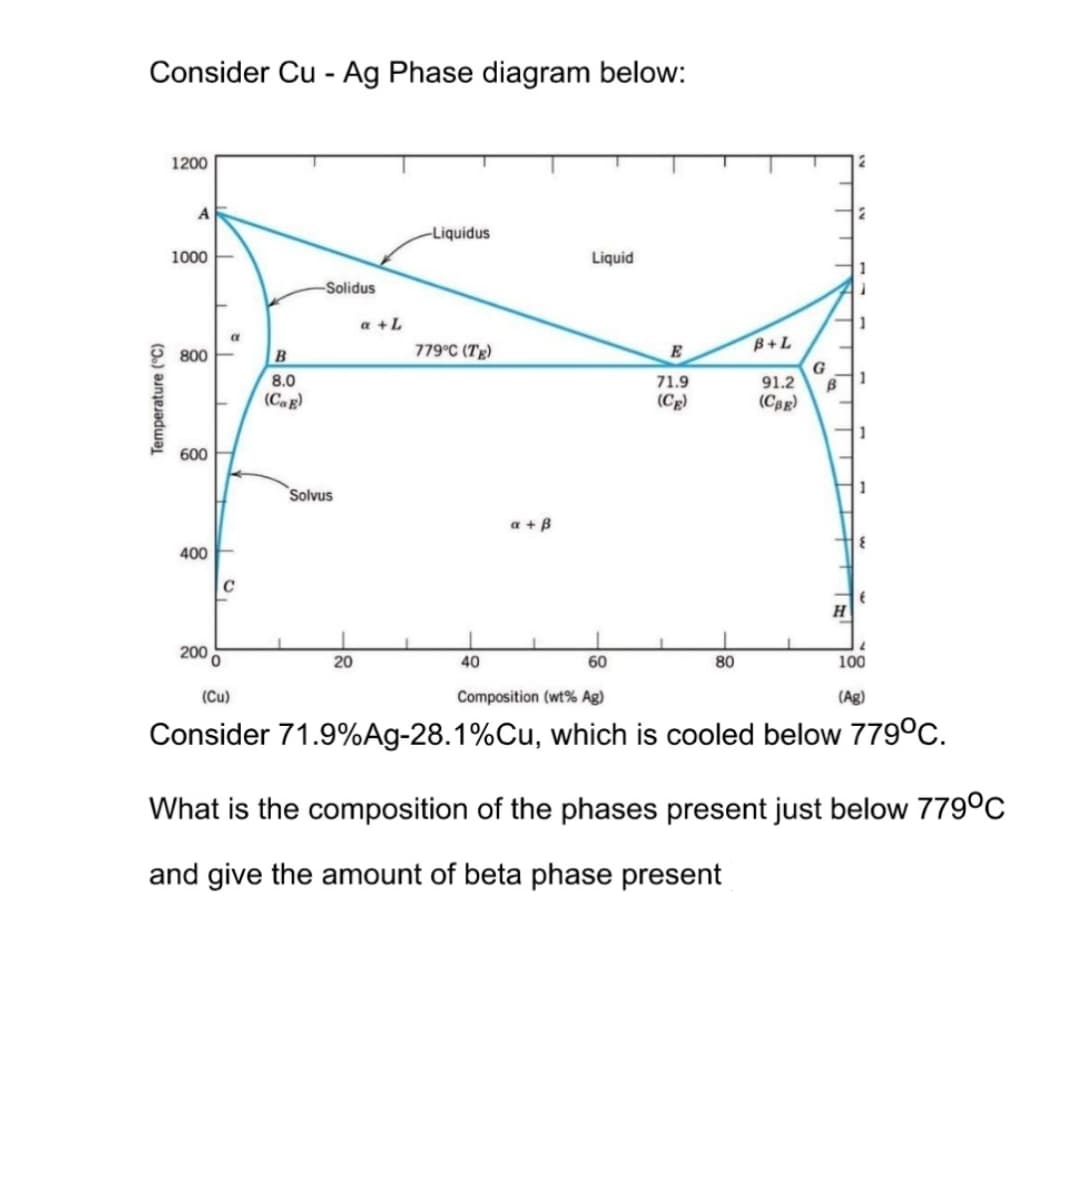 Consider Cu - Ag Phase diagram below:
1200
A
-Liquidus
1000
Liquid
-Solidus
779°C (TE)
800
Temperature (°C)
600
400
a
C
200 0
B
8.0
(Cag)
Solvus
a +L
a + ß
E
71.9
(CE)
B+L
91.2
(CBE)
B
H
1
1
1
1
1
{
(
L
20
40
60
80
100
(Cu)
Composition (wt% Ag)
(Ag)
Consider 71.9% Ag-28.1% Cu, which is cooled below 779°C.
What is the composition of the phases present just below 779°C
and give the amount of beta phase present